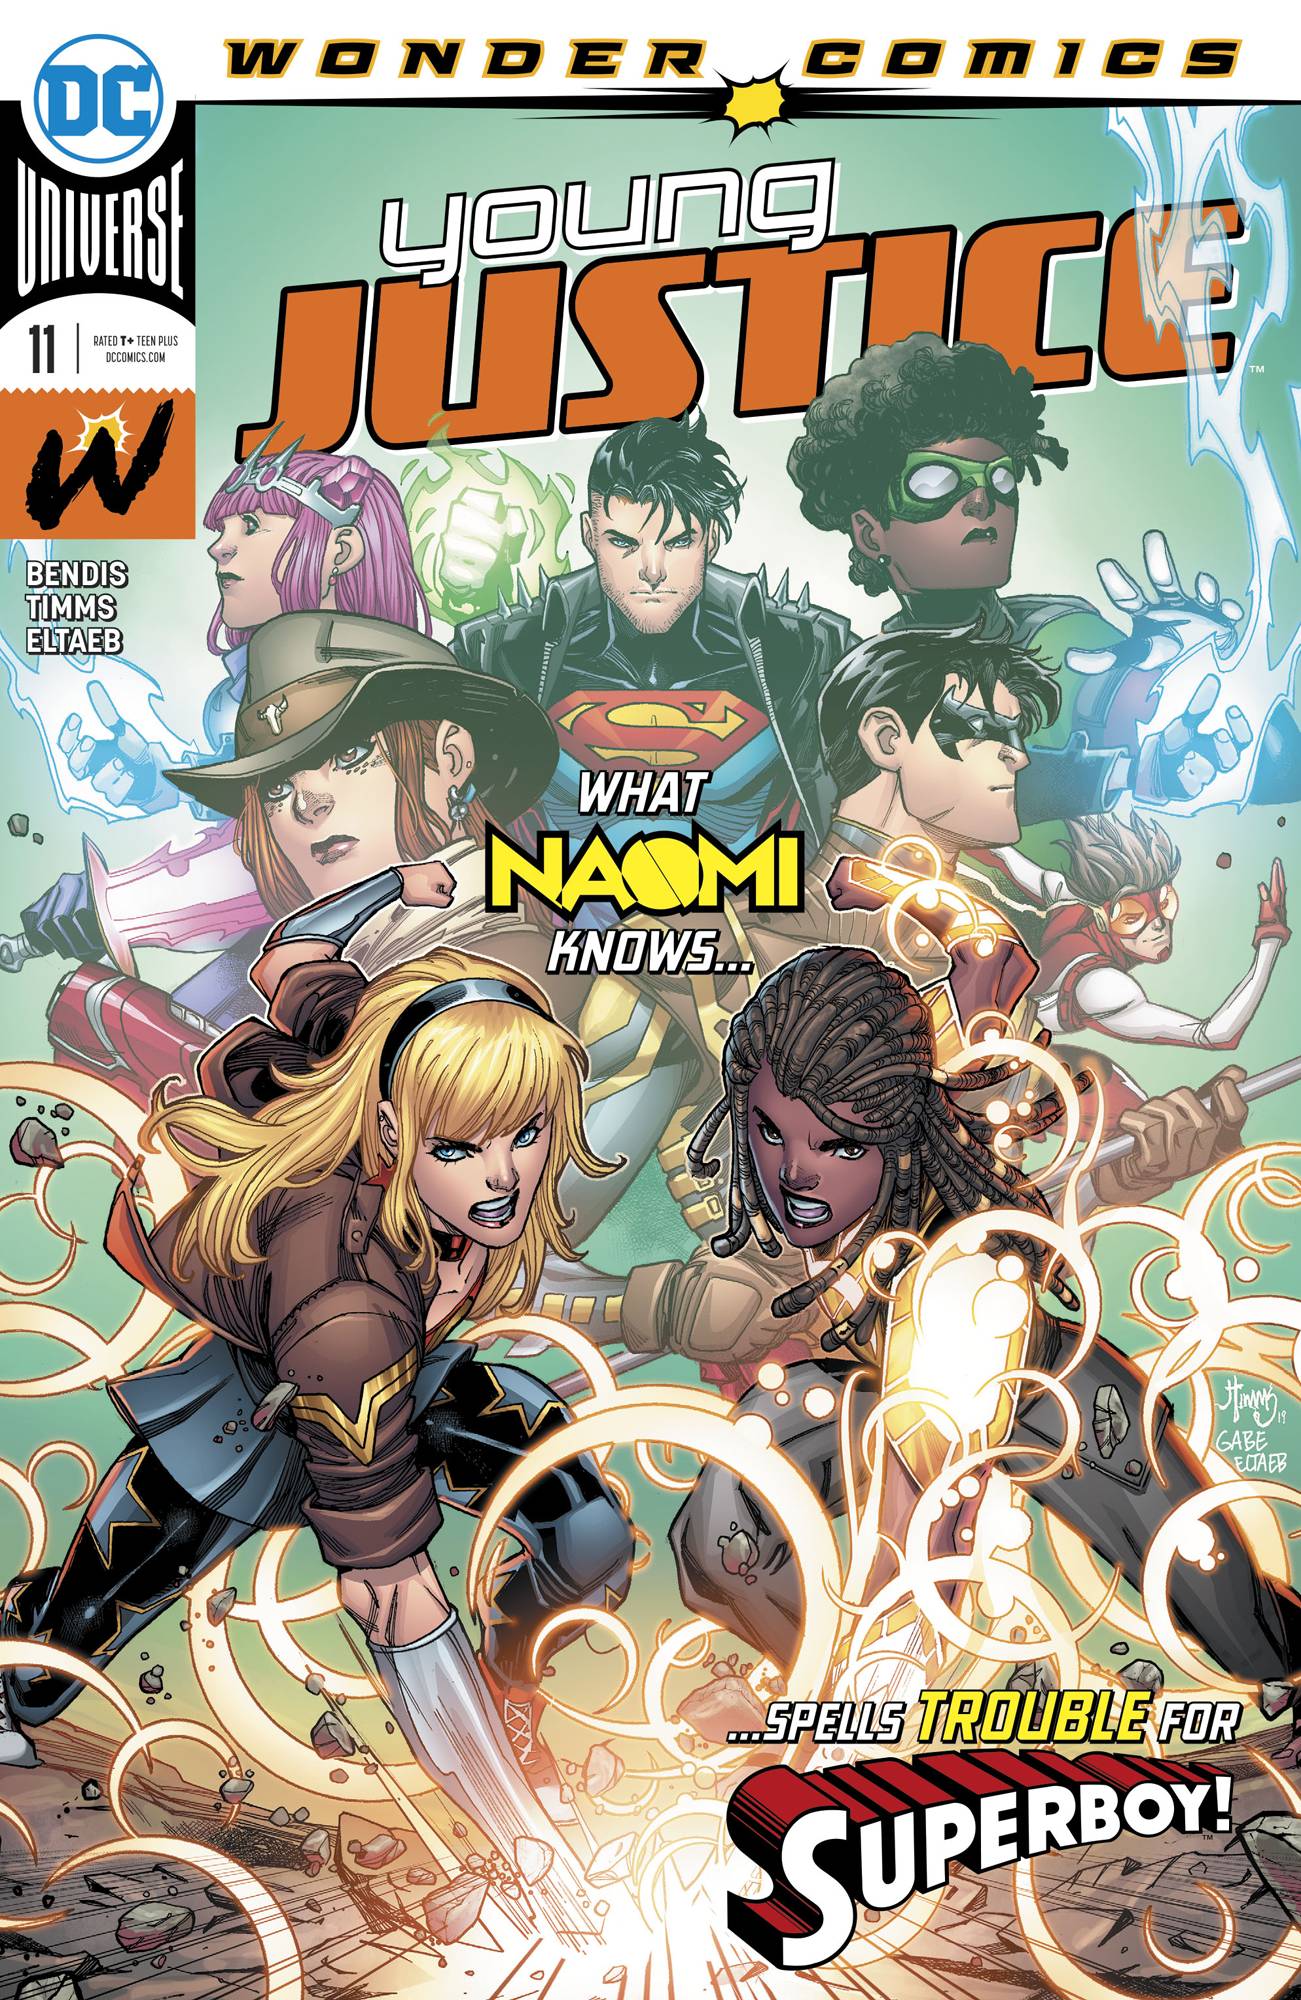 YOUNG JUSTICE #11